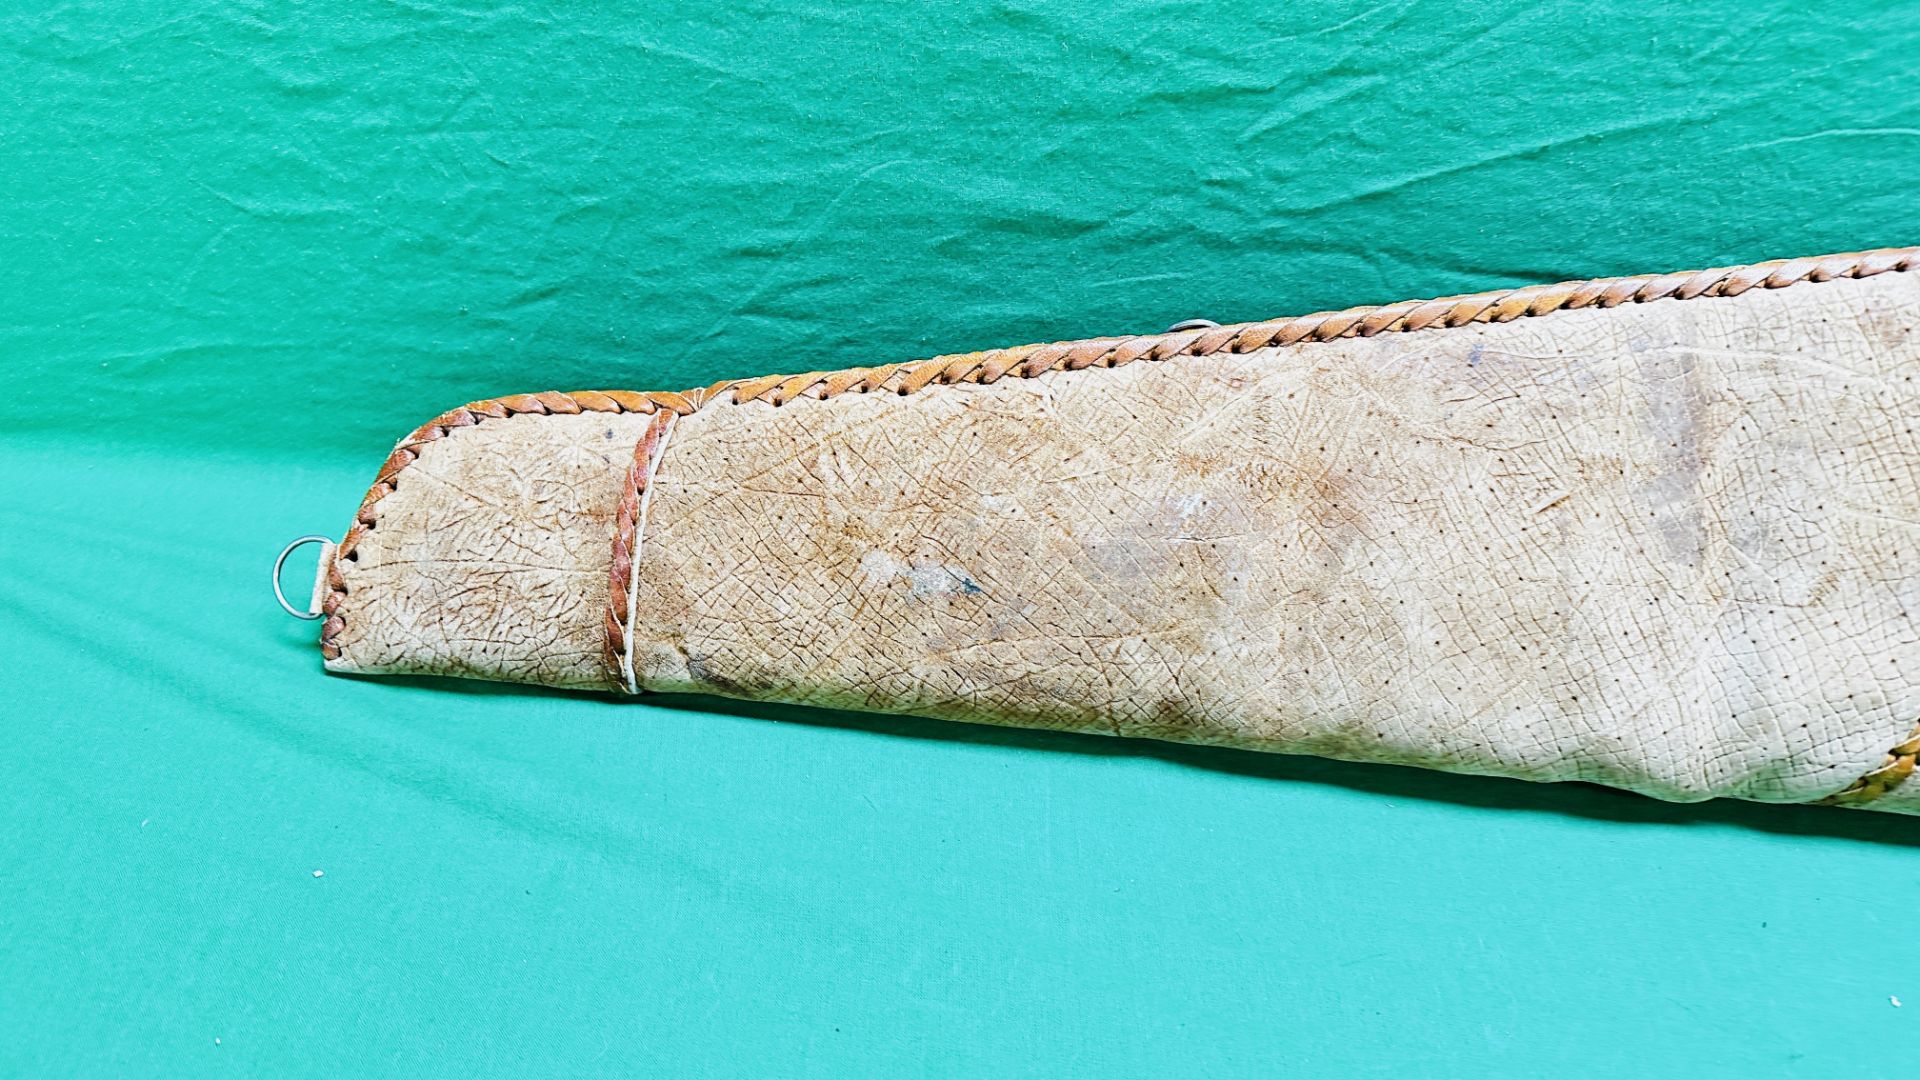 A GOOD QUALITY TAN LEATHER AND BRADY GUN SLIP. - Image 4 of 10